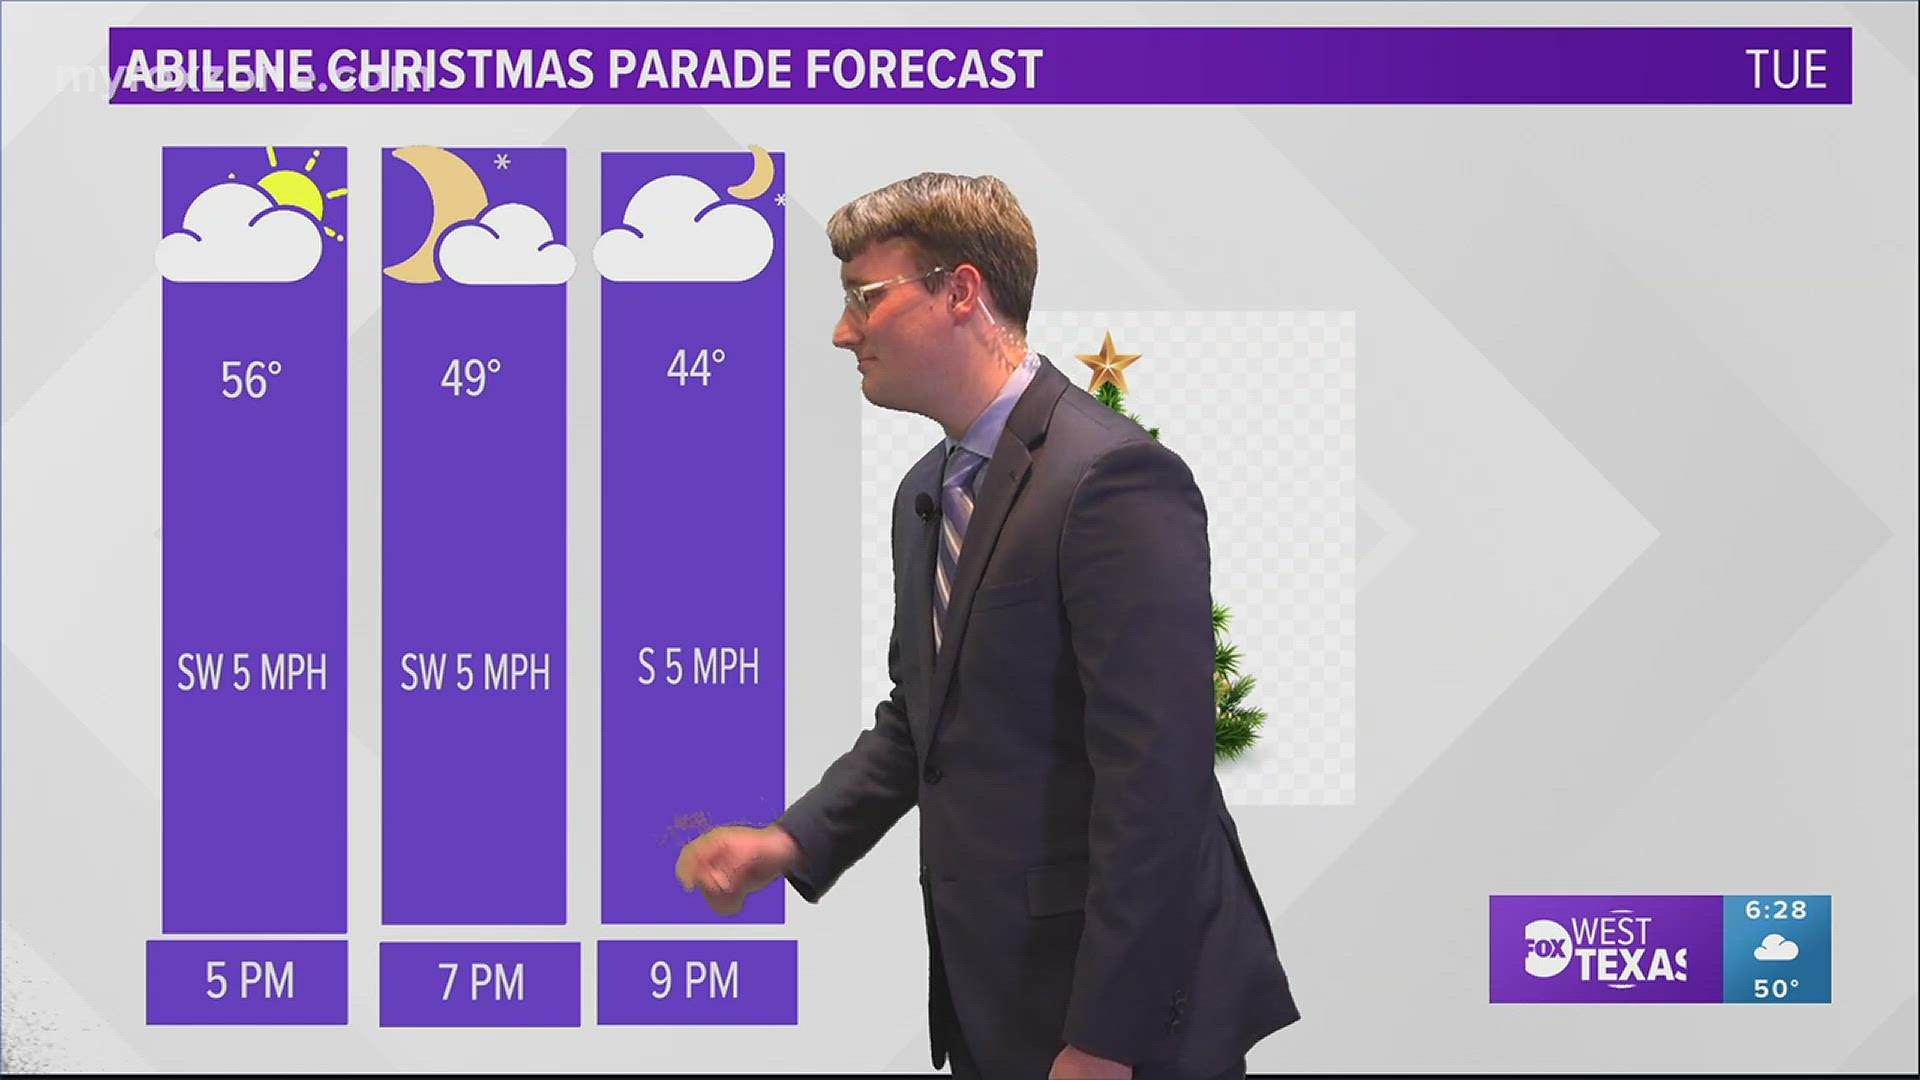 Meteorologist Britton Musall gives the forecast for the Abilene Christmas parade.